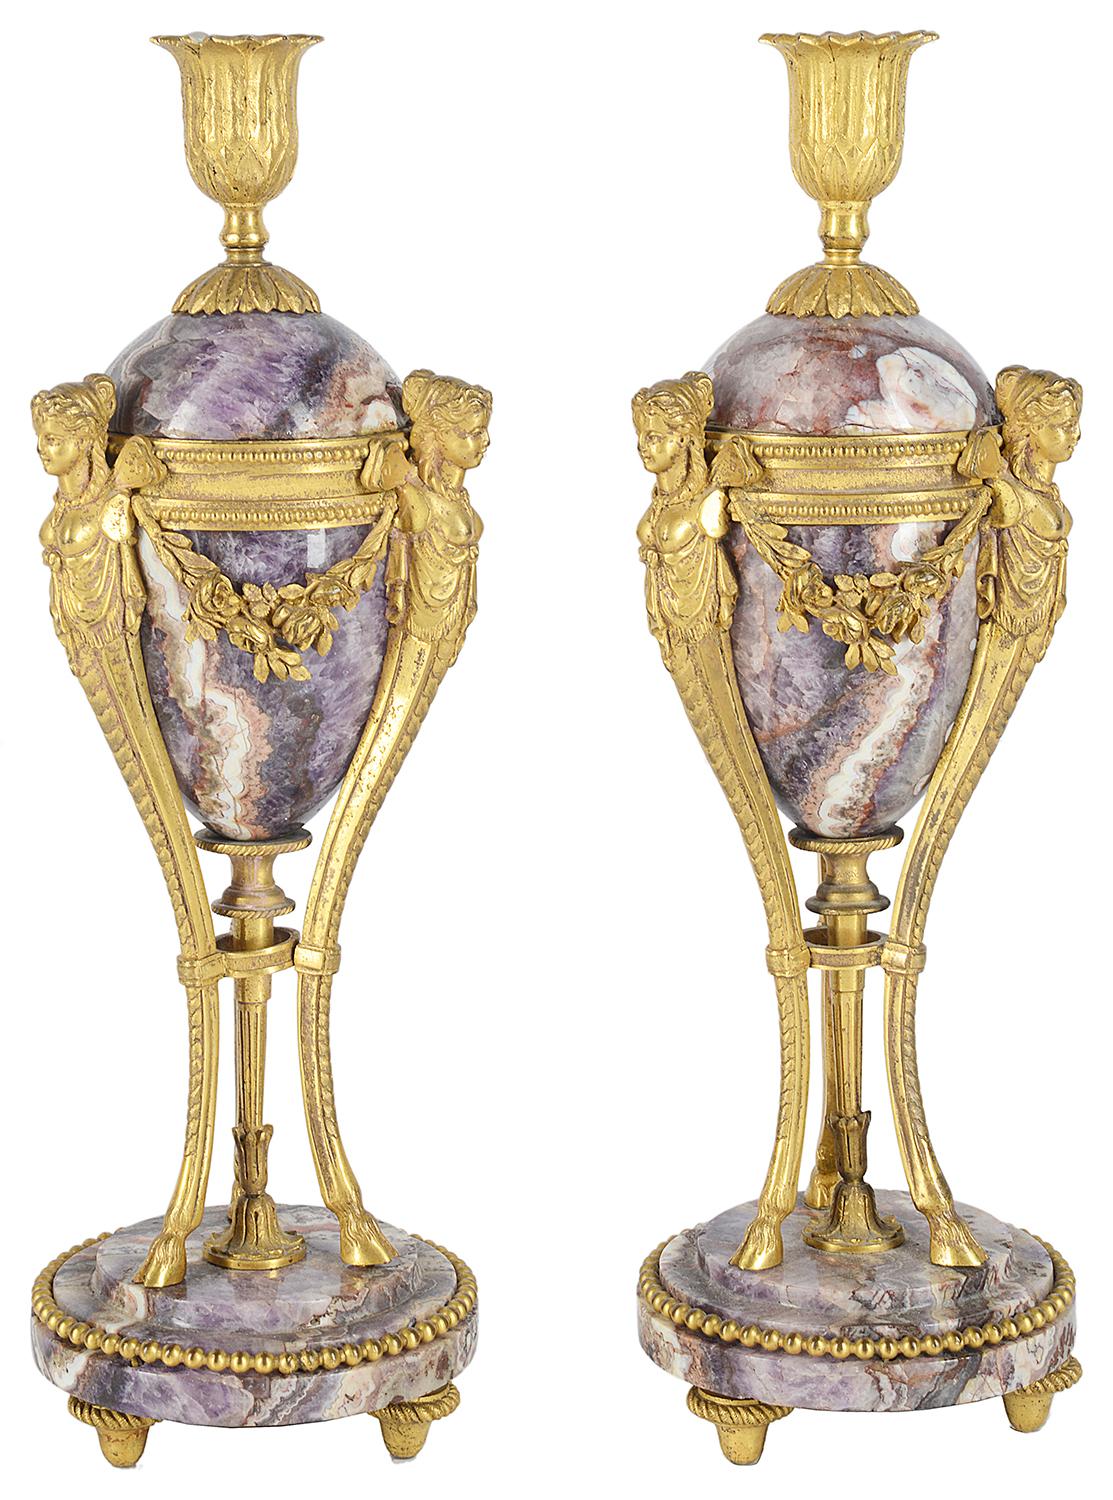 A very good quality pair of early 19th century marble and gilded ormolu candle sticks, each with winged female monopodia mounts, foliate swag decoration, tripod supports terminating in hoof feet and marble bases.